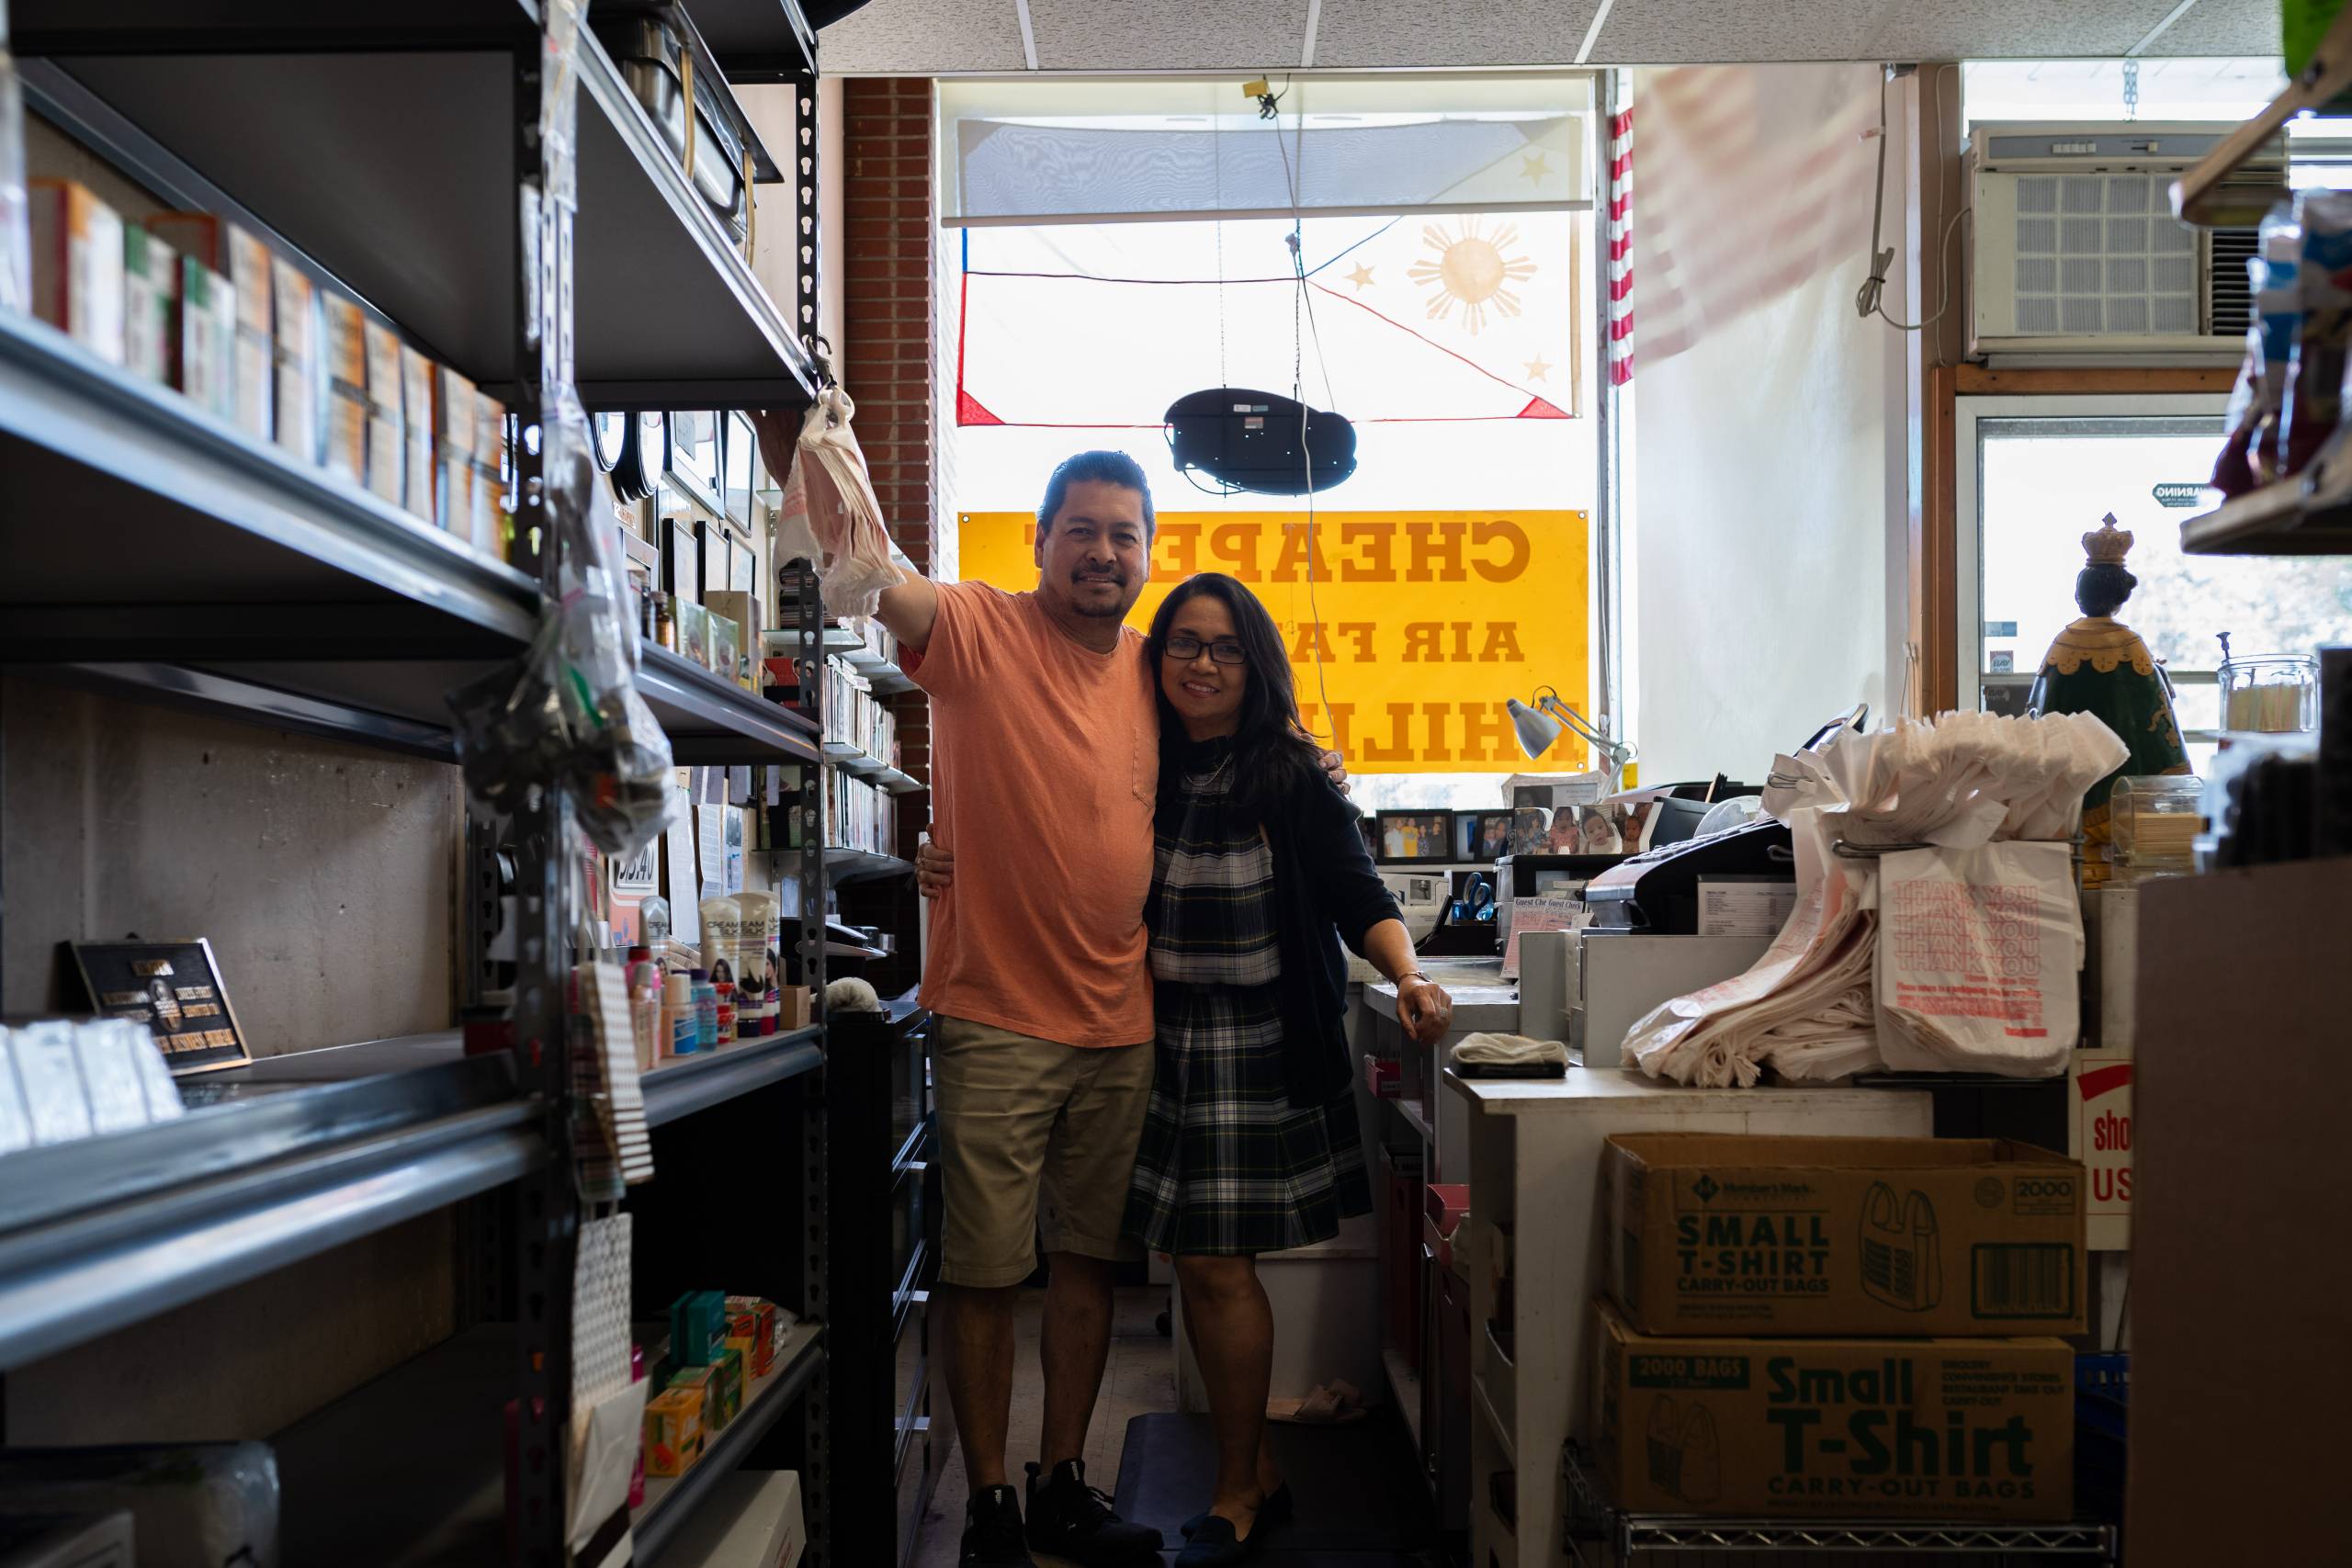 Husband and wife stand behind the front counter of their small Filipino grocer and takeout shop.